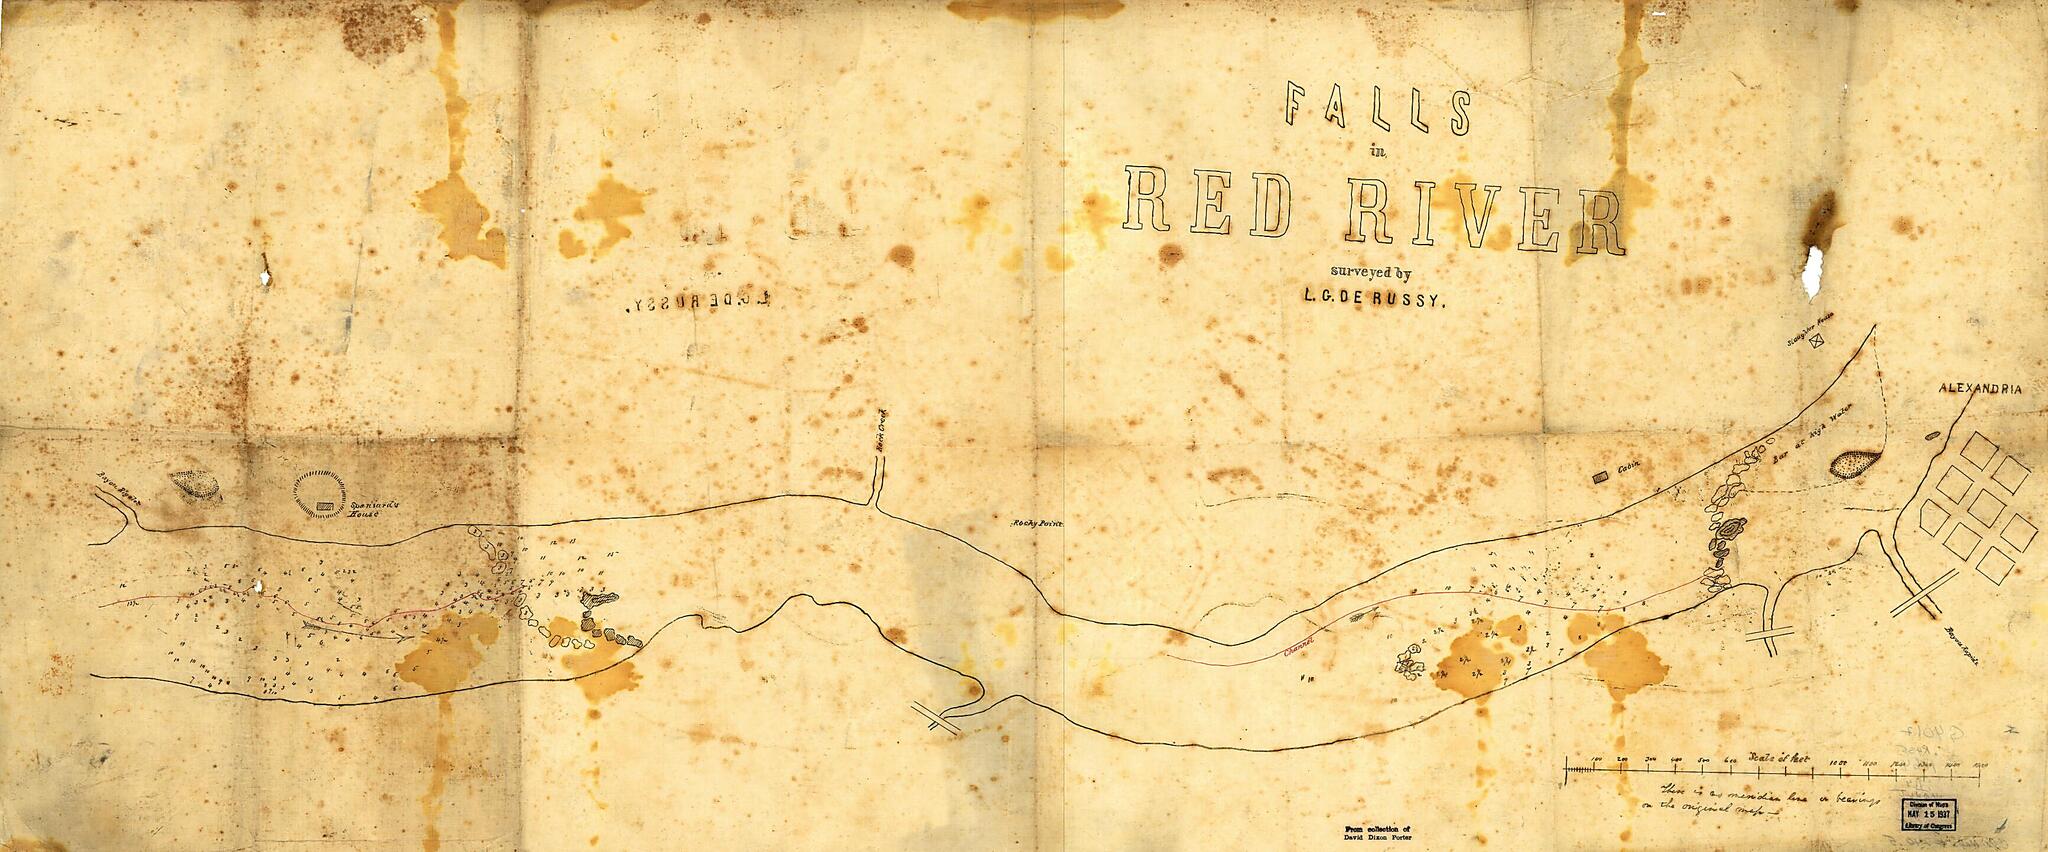 This old map of Falls In Red River, Surveyed by L. G. De Russy from 1864 was created by Lewis G. De Russy in 1864